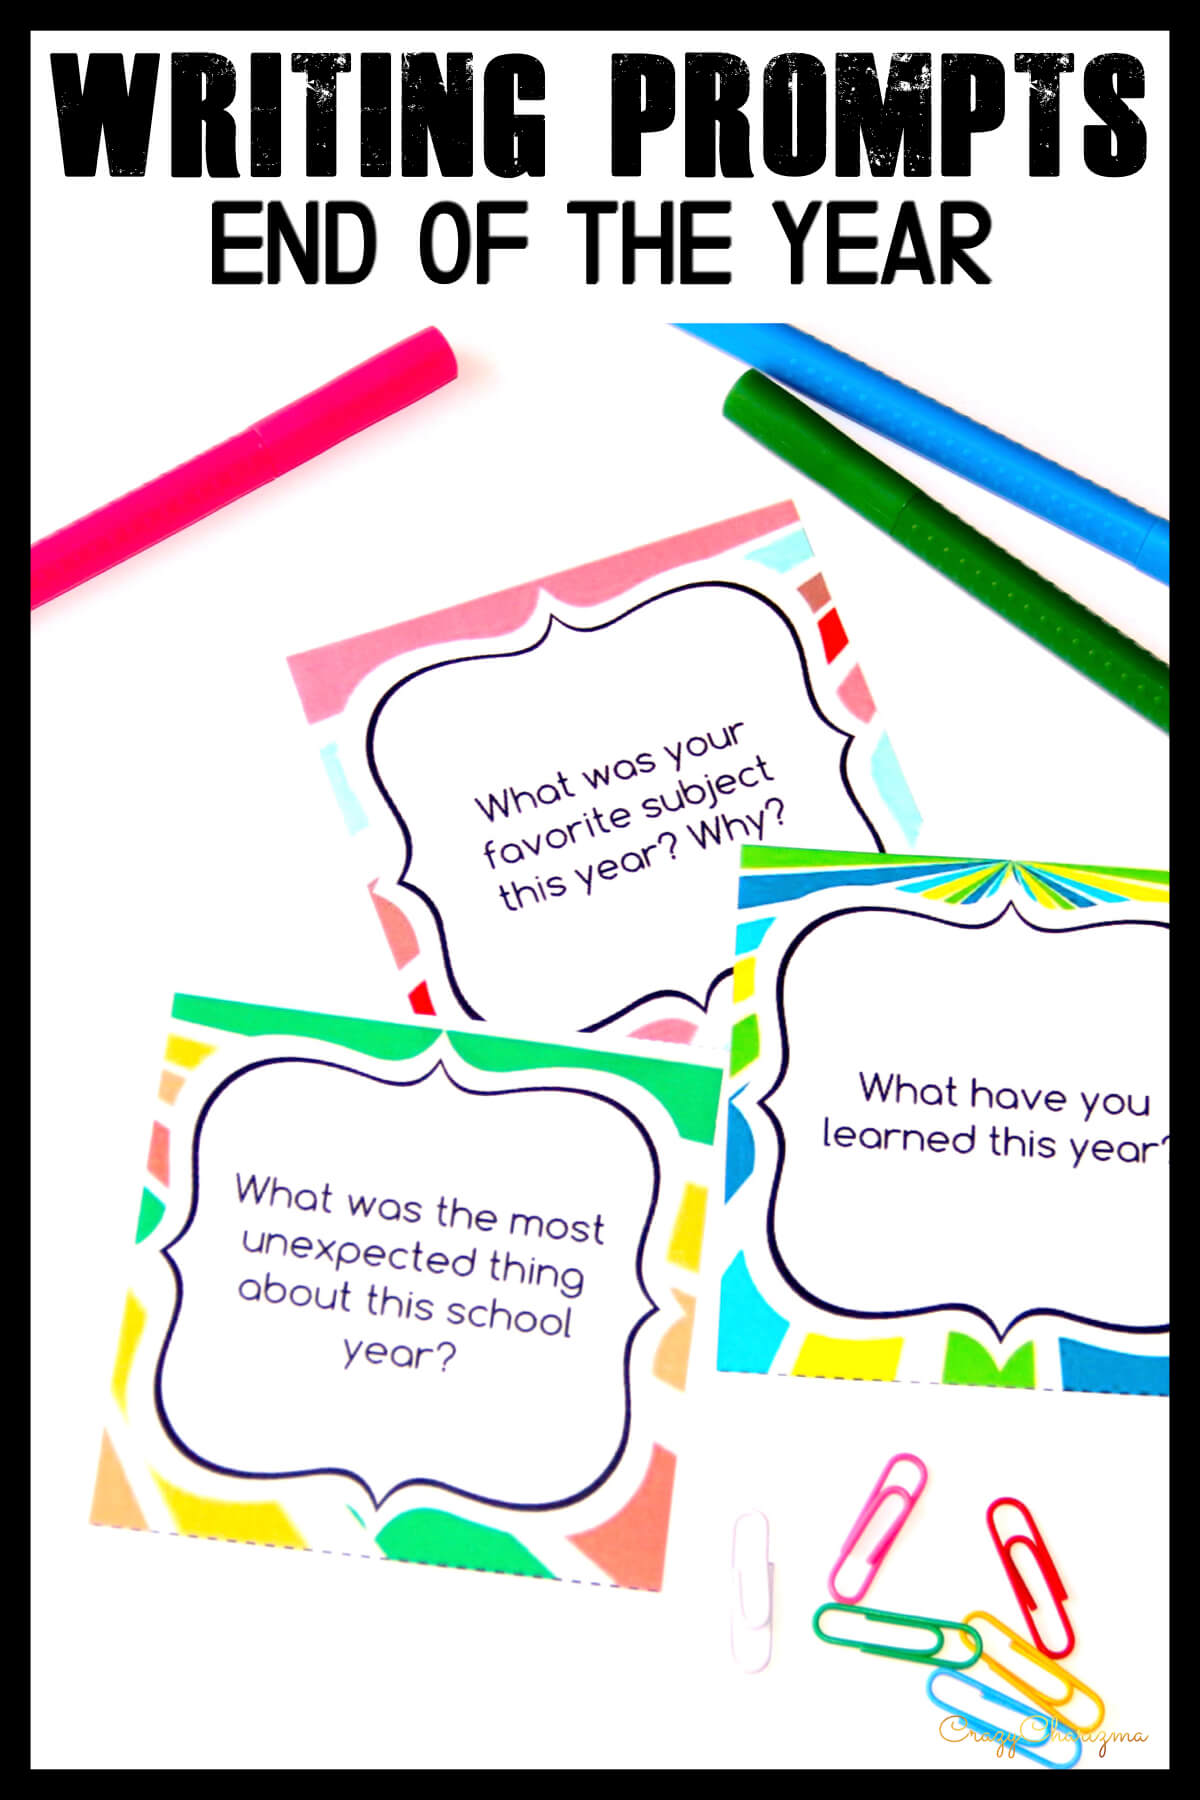 Celebrate the End of the Year in your classroom and provide students with writing tasks and ideas. The packet contains narrative, informational and opinion writing prompts for teens. The prompts can be used as Writing Centers, as well as during ESL lessons.